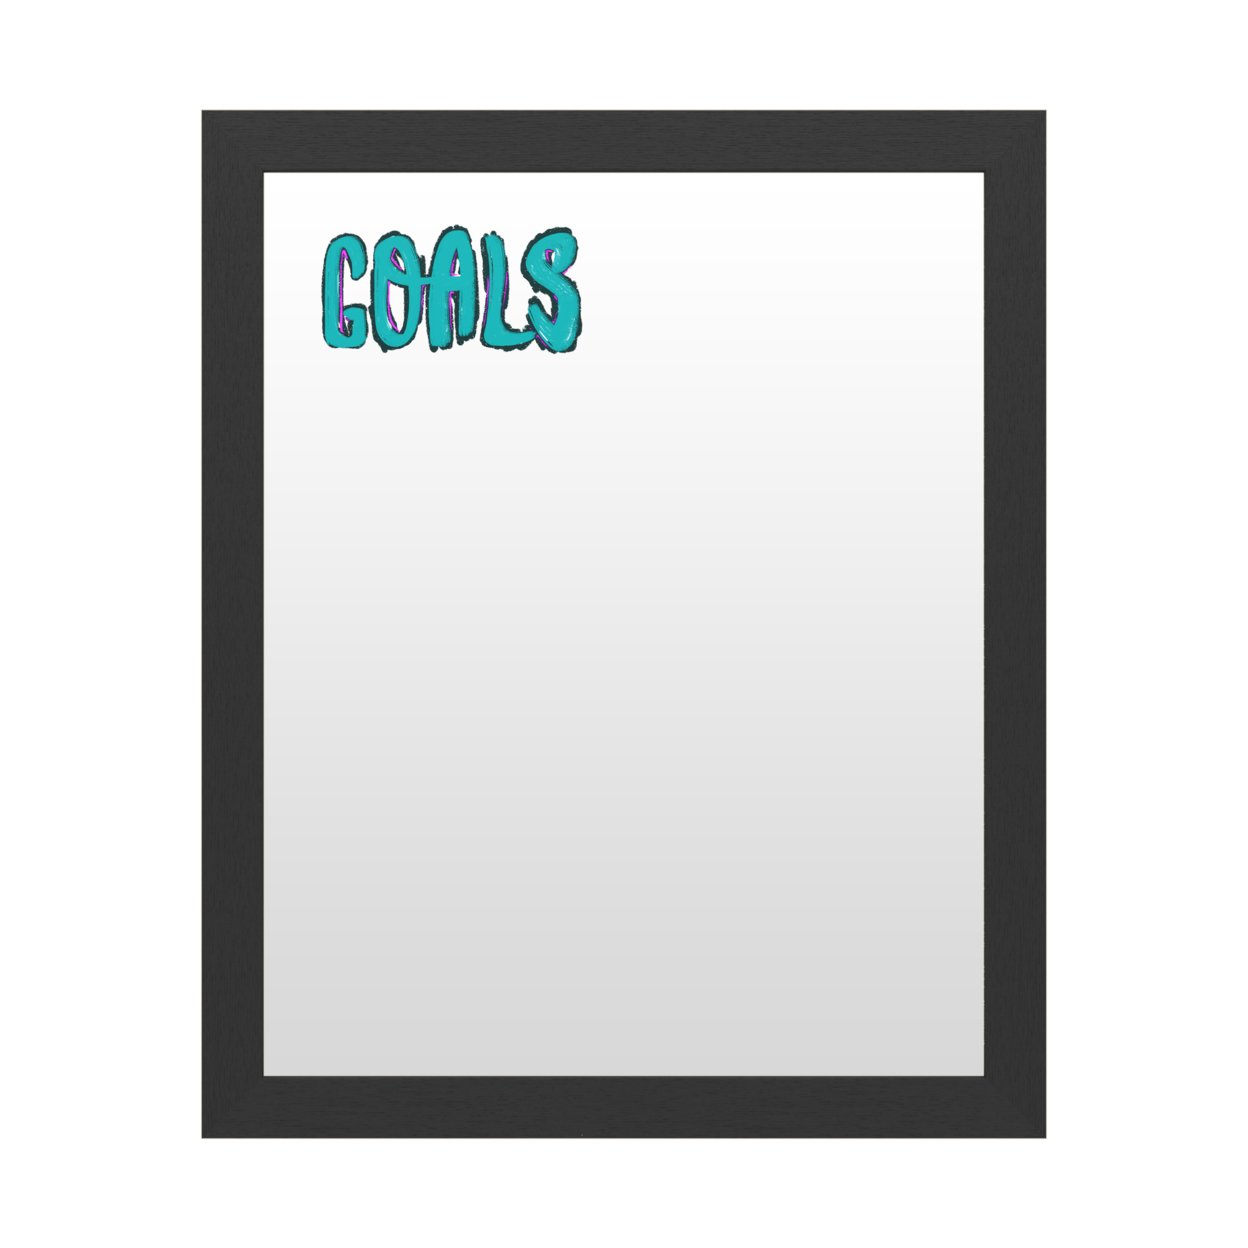 Dry Erase 16 X 20 Marker Board With Printed Artwork - Goals Script White Board - Ready To Hang